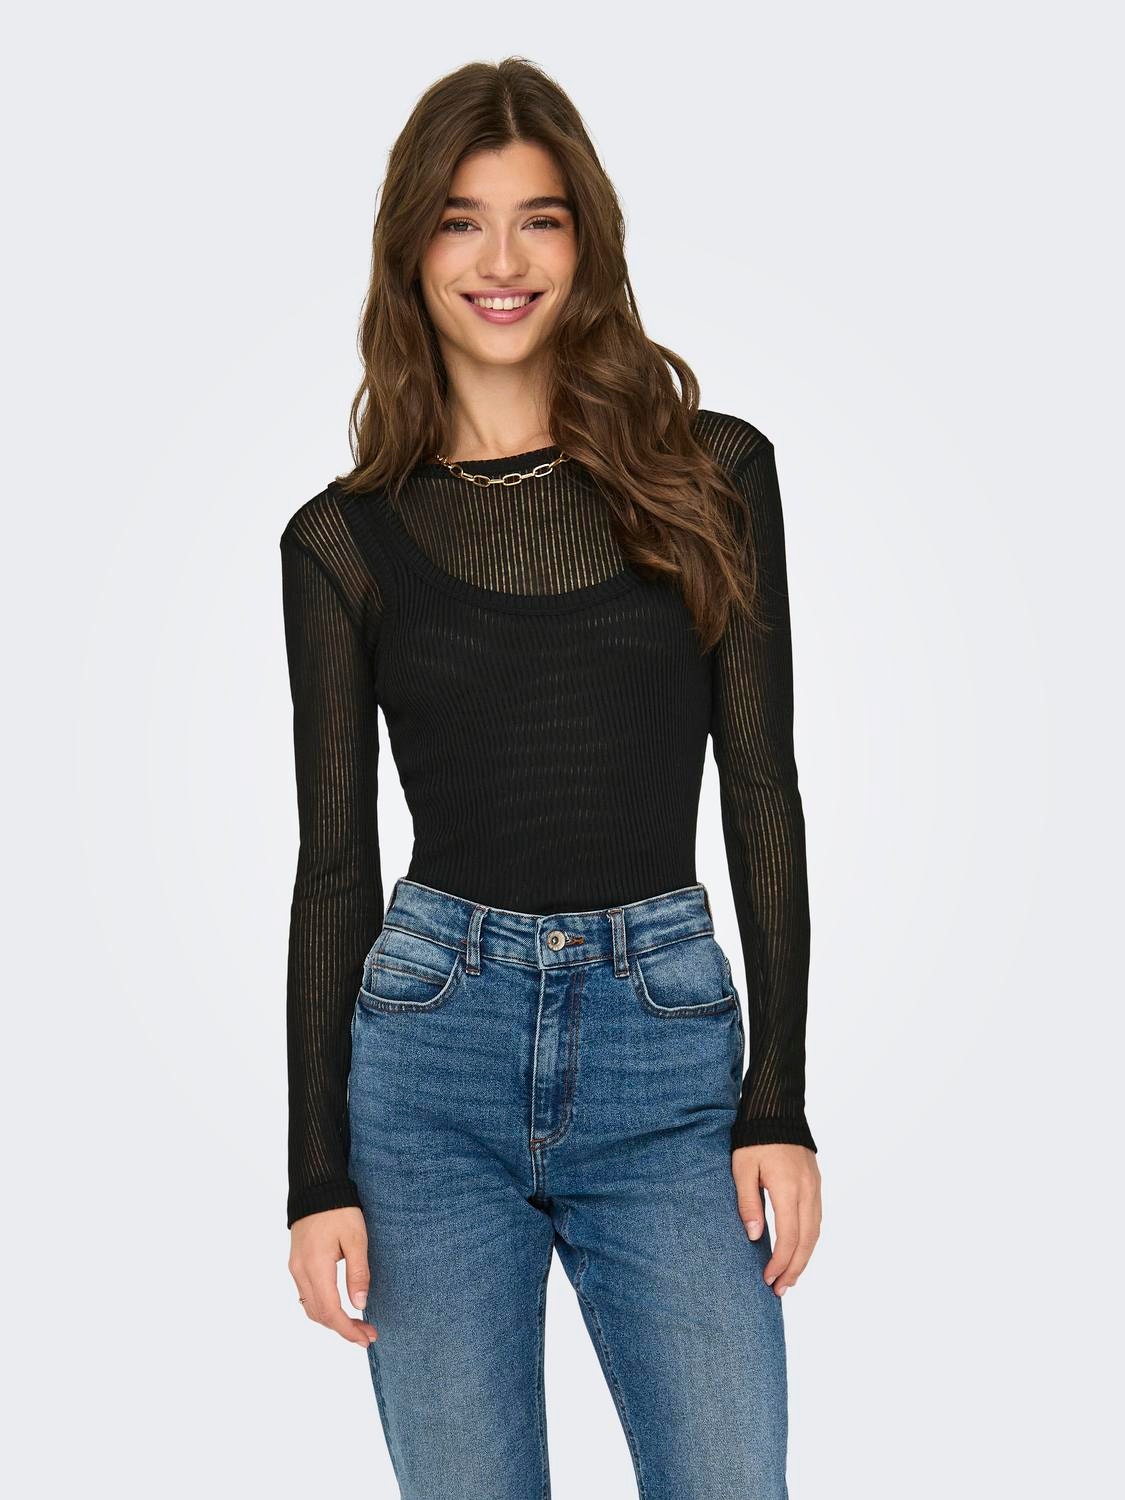 ONLY Long sleeved top with rib -Black - 15319080